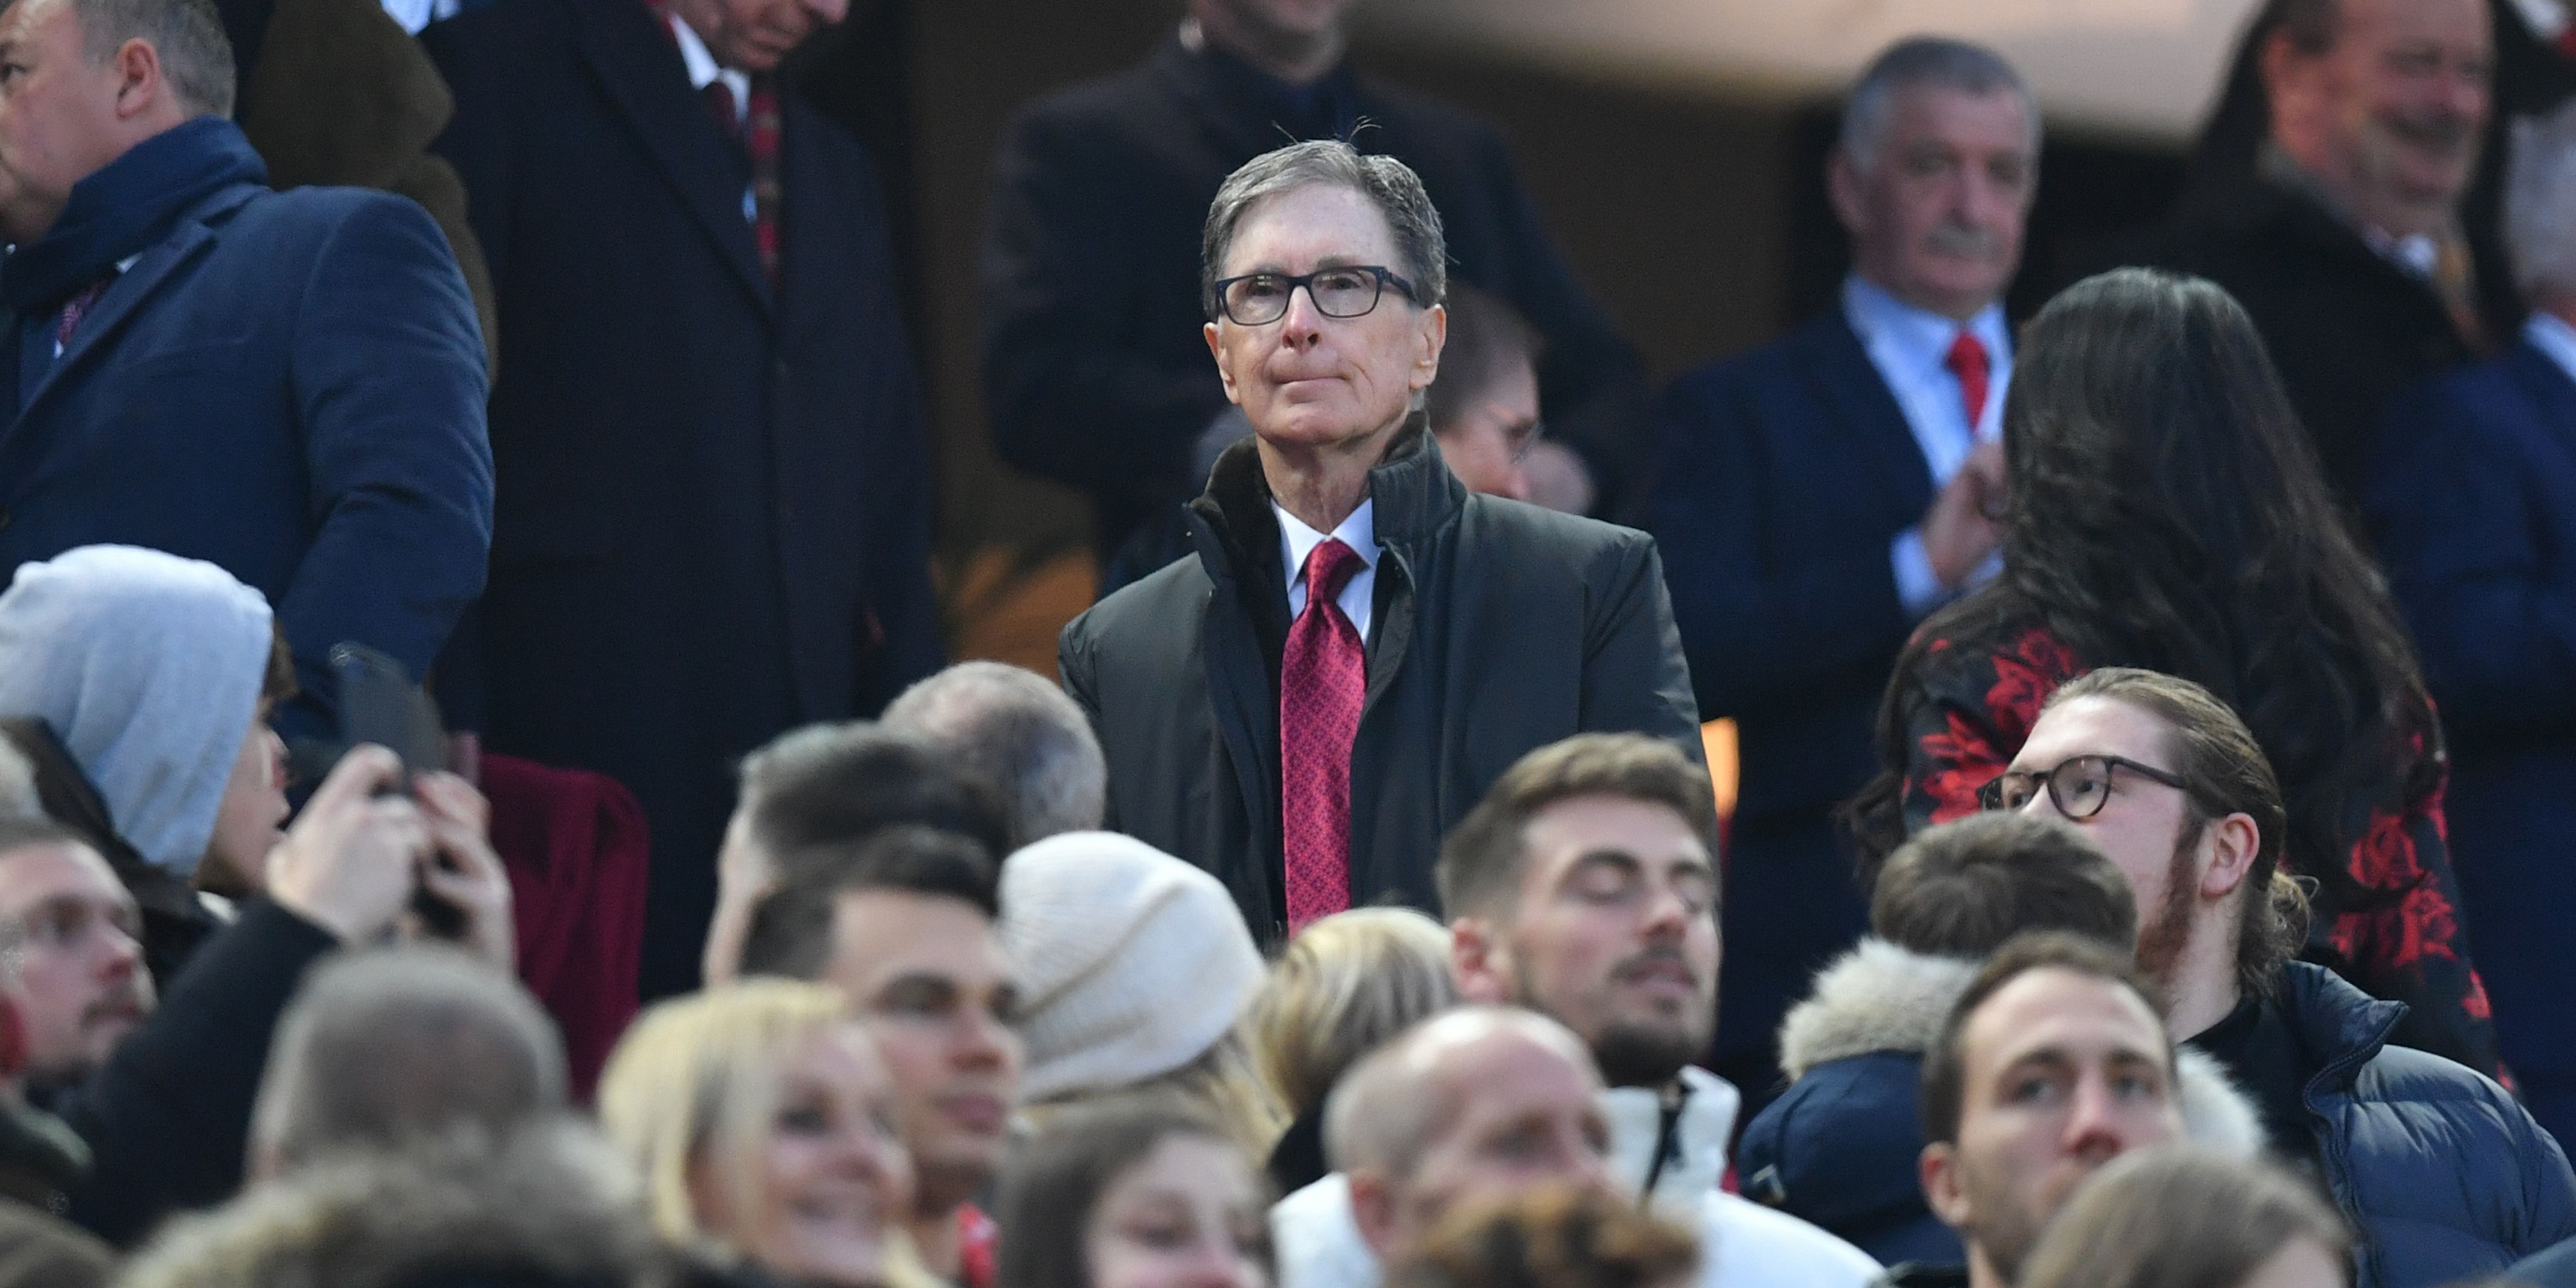 FSG may have already received multiple approaches for Liverpool – Financial Times